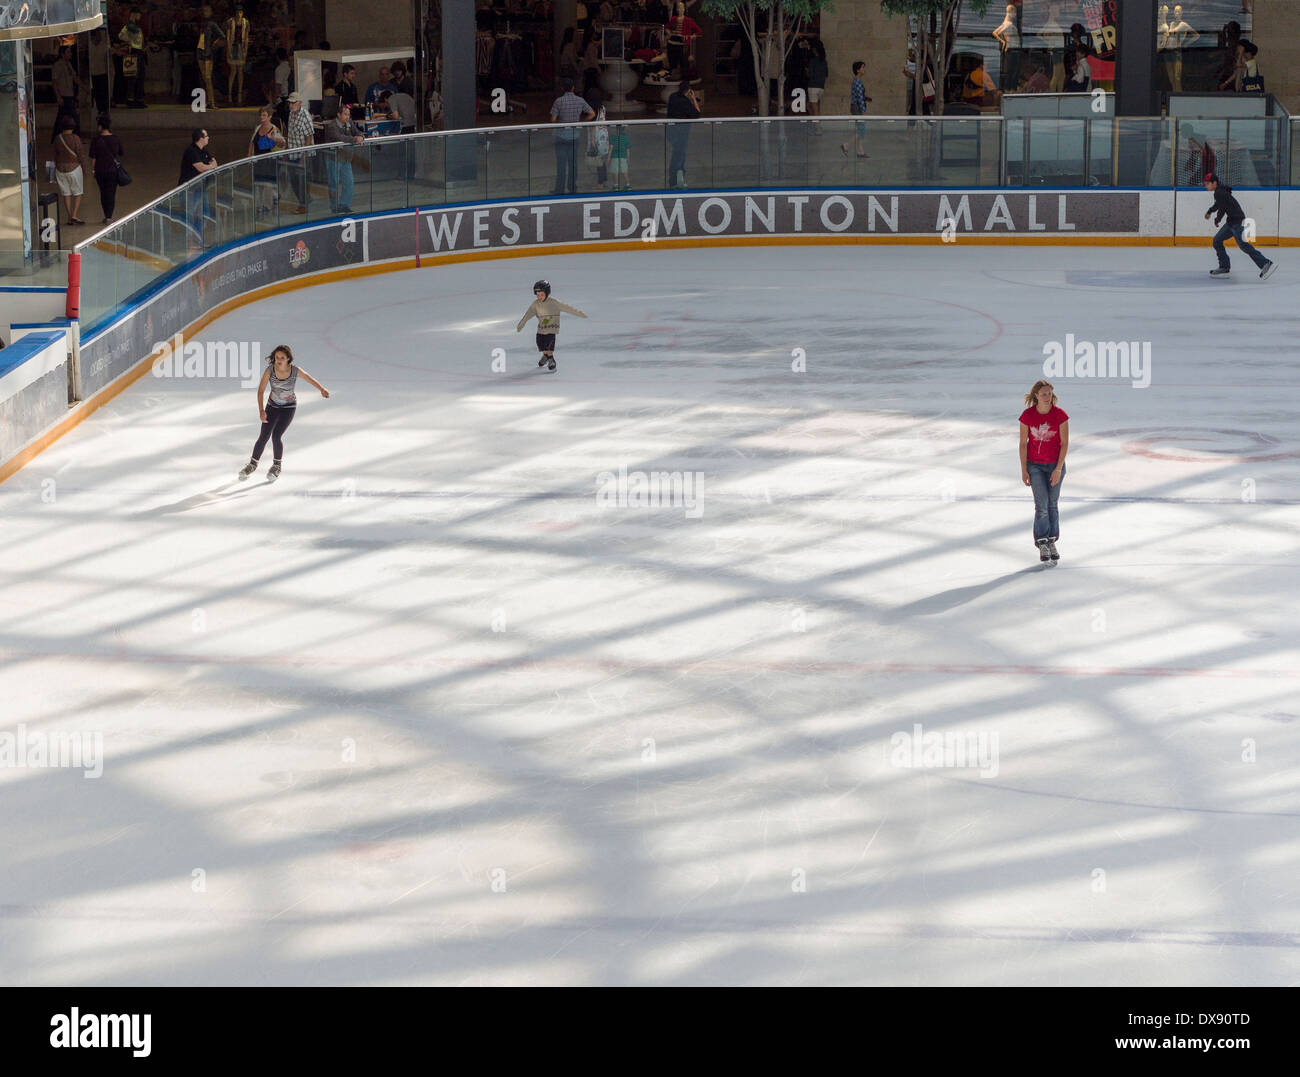 Skating at West Edmonton Mall Ice Palace. Four youths take to the large